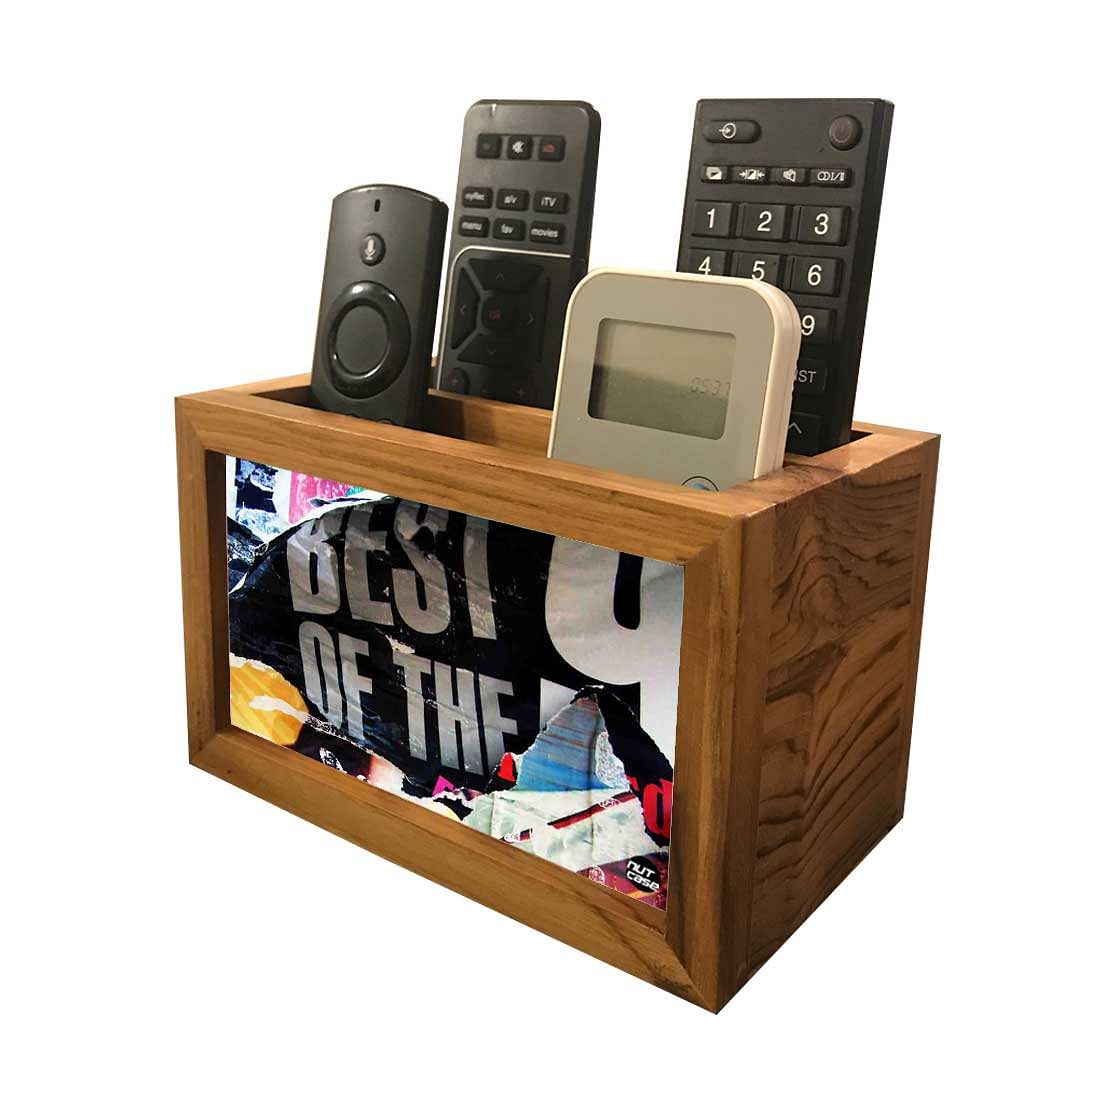 Remote Control Stand Holder Organizer For TV / AC Remotes -  Best Of the Nutcase